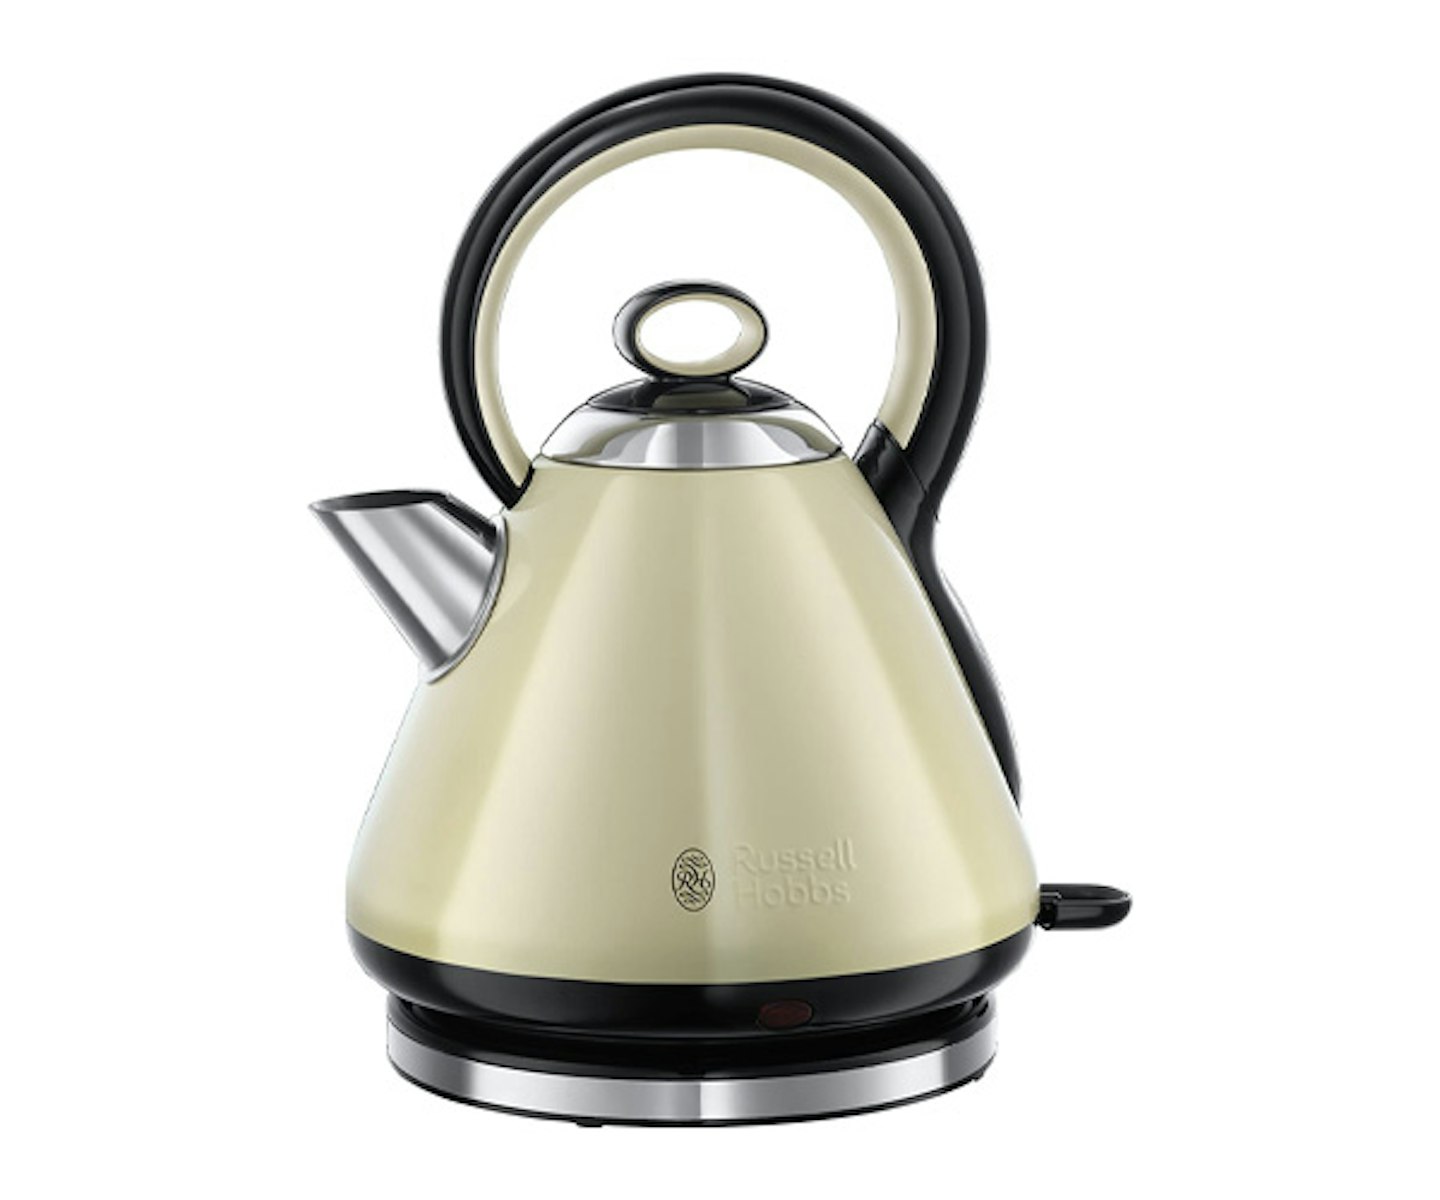 Russell Hobbs 21888 Legacy Quiet Boil Electric Kettle